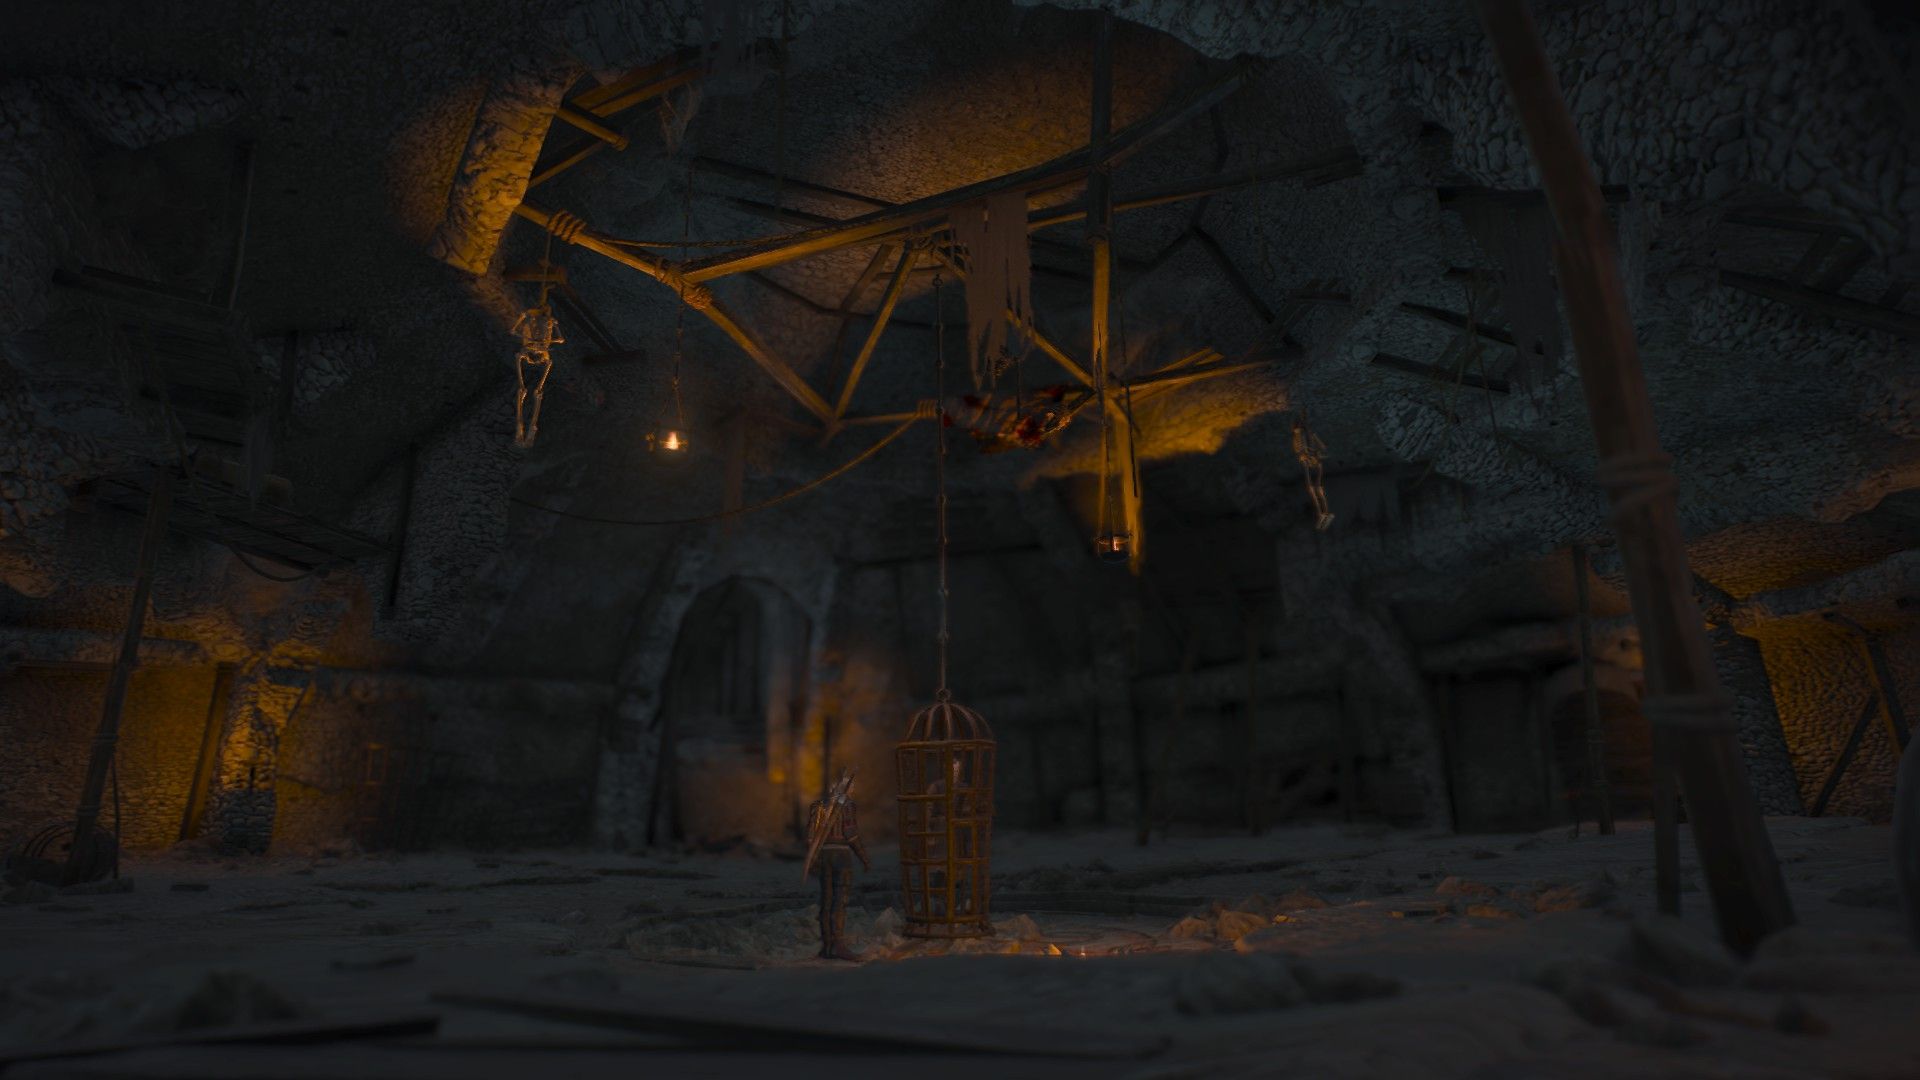 Geralt locks his friend in a cage in a cavernous room under the castle.